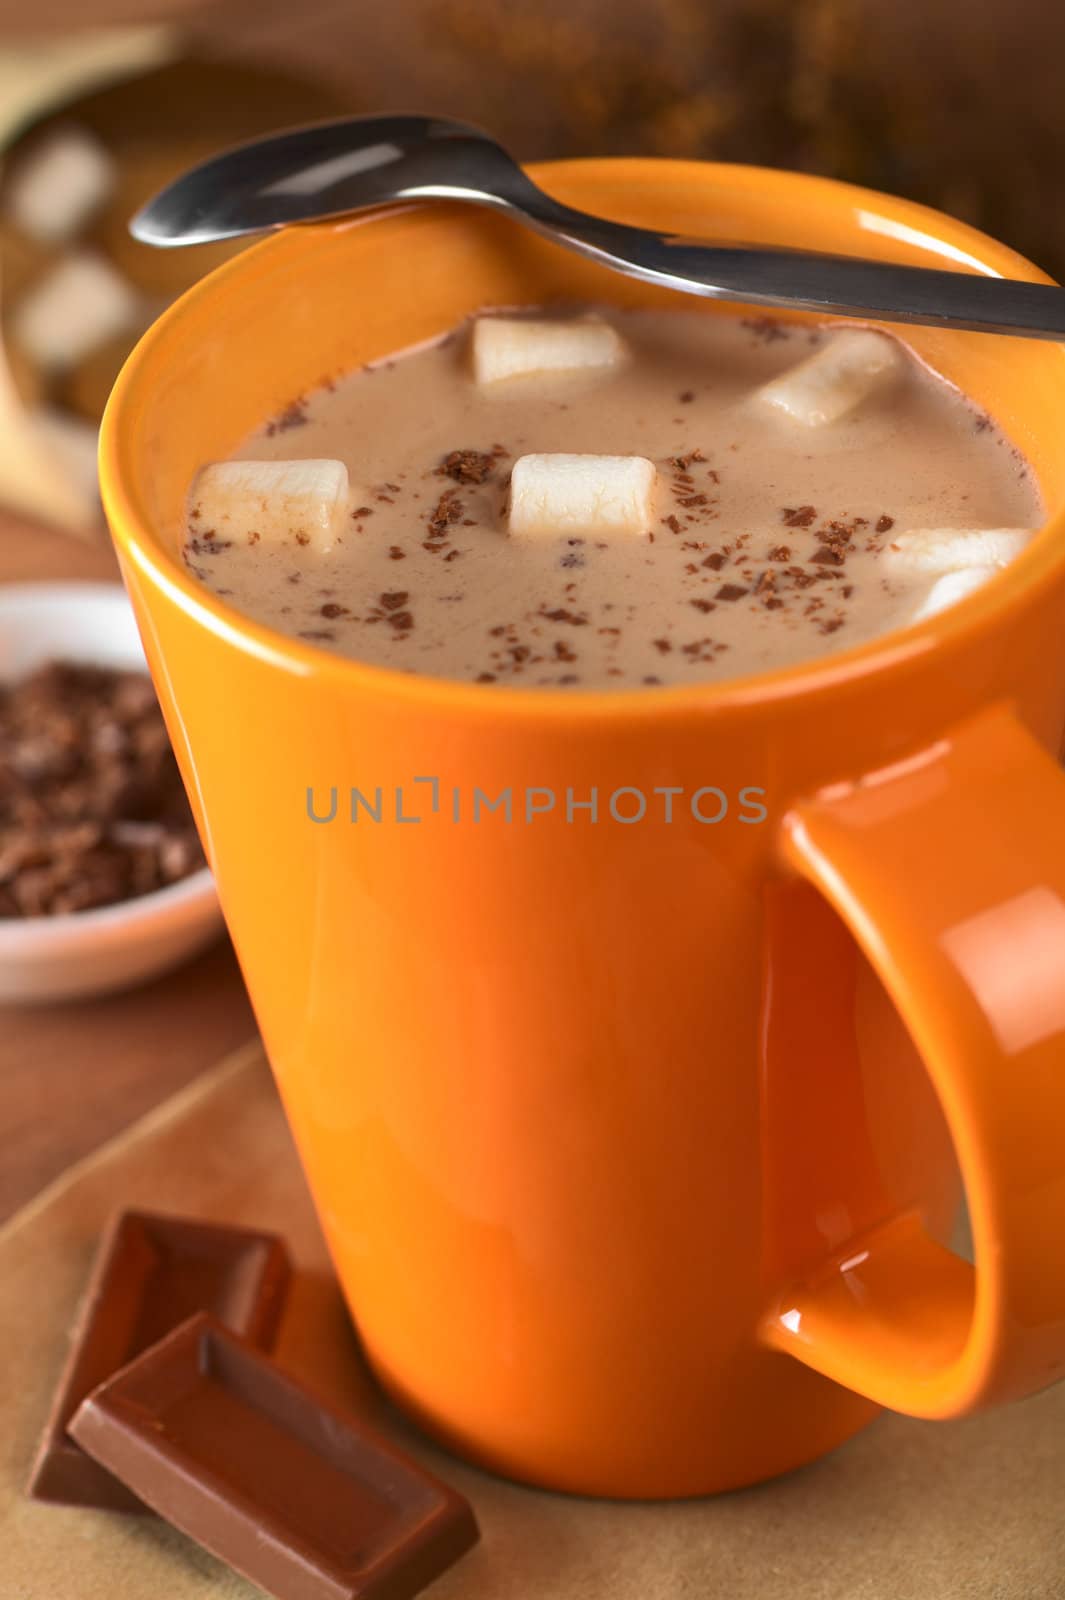 Hot chocolate with marshmallows in orange cup with a teaspoon on the rim and chocolate pieces on the side (Selective Focus, Focus on the marshmallows in the middle of the hot chocolate)